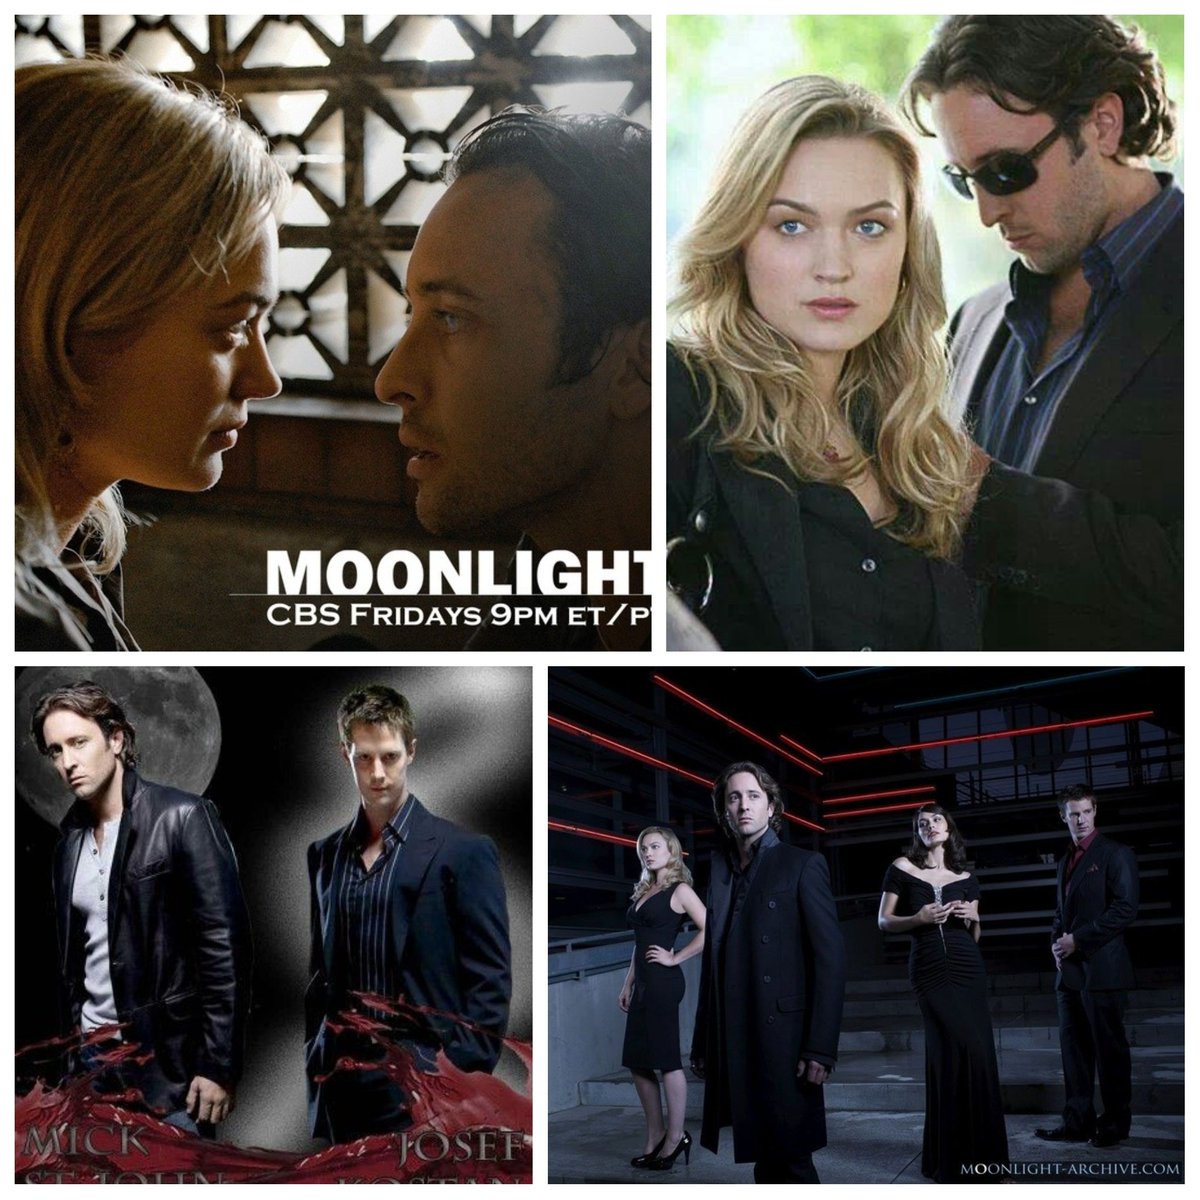 @DrMoneyTrees Moonlight (2007) with #AlexOLoughlin @SophiaMyles @jason_dohring & #ShannynSossaman 🩷. It was an amazing show that had so much potential & incredible acting. Still holding out hope for a reunion special/movie🤞. I would absolutely love that 😃❤️. 
#Moonlight